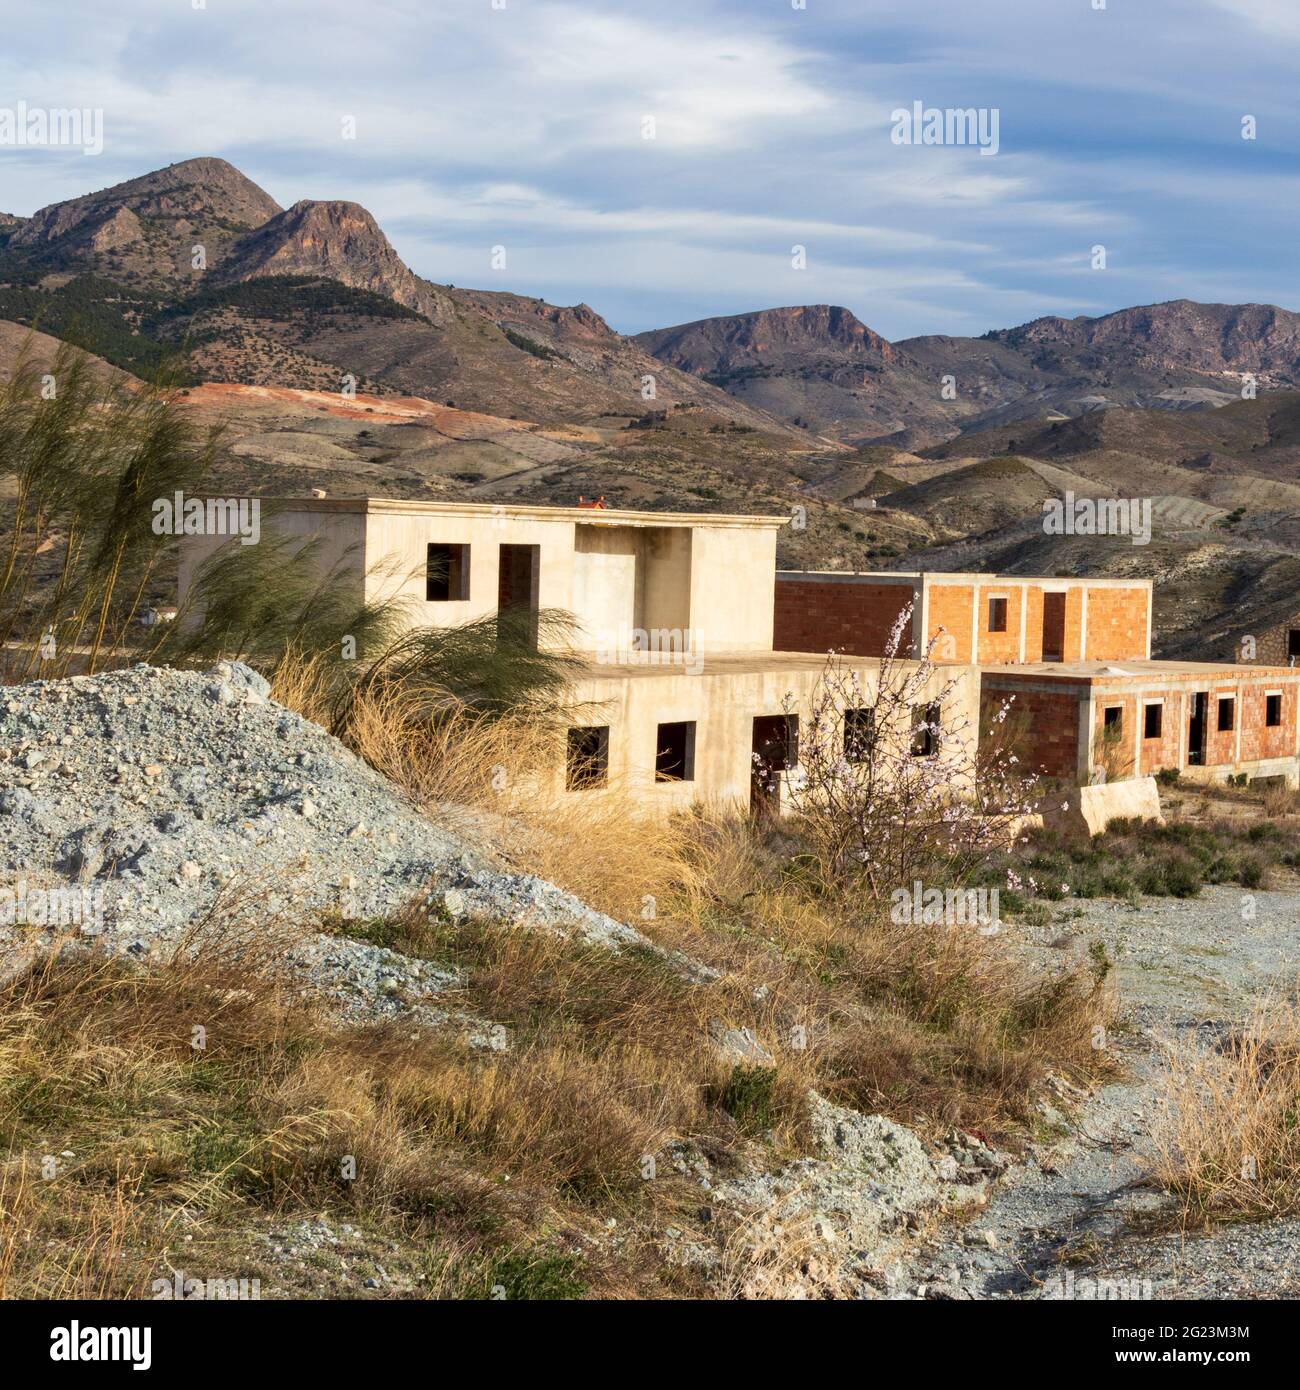 Two Illegal Unfinished Empty Houses in Spain Stock Photo